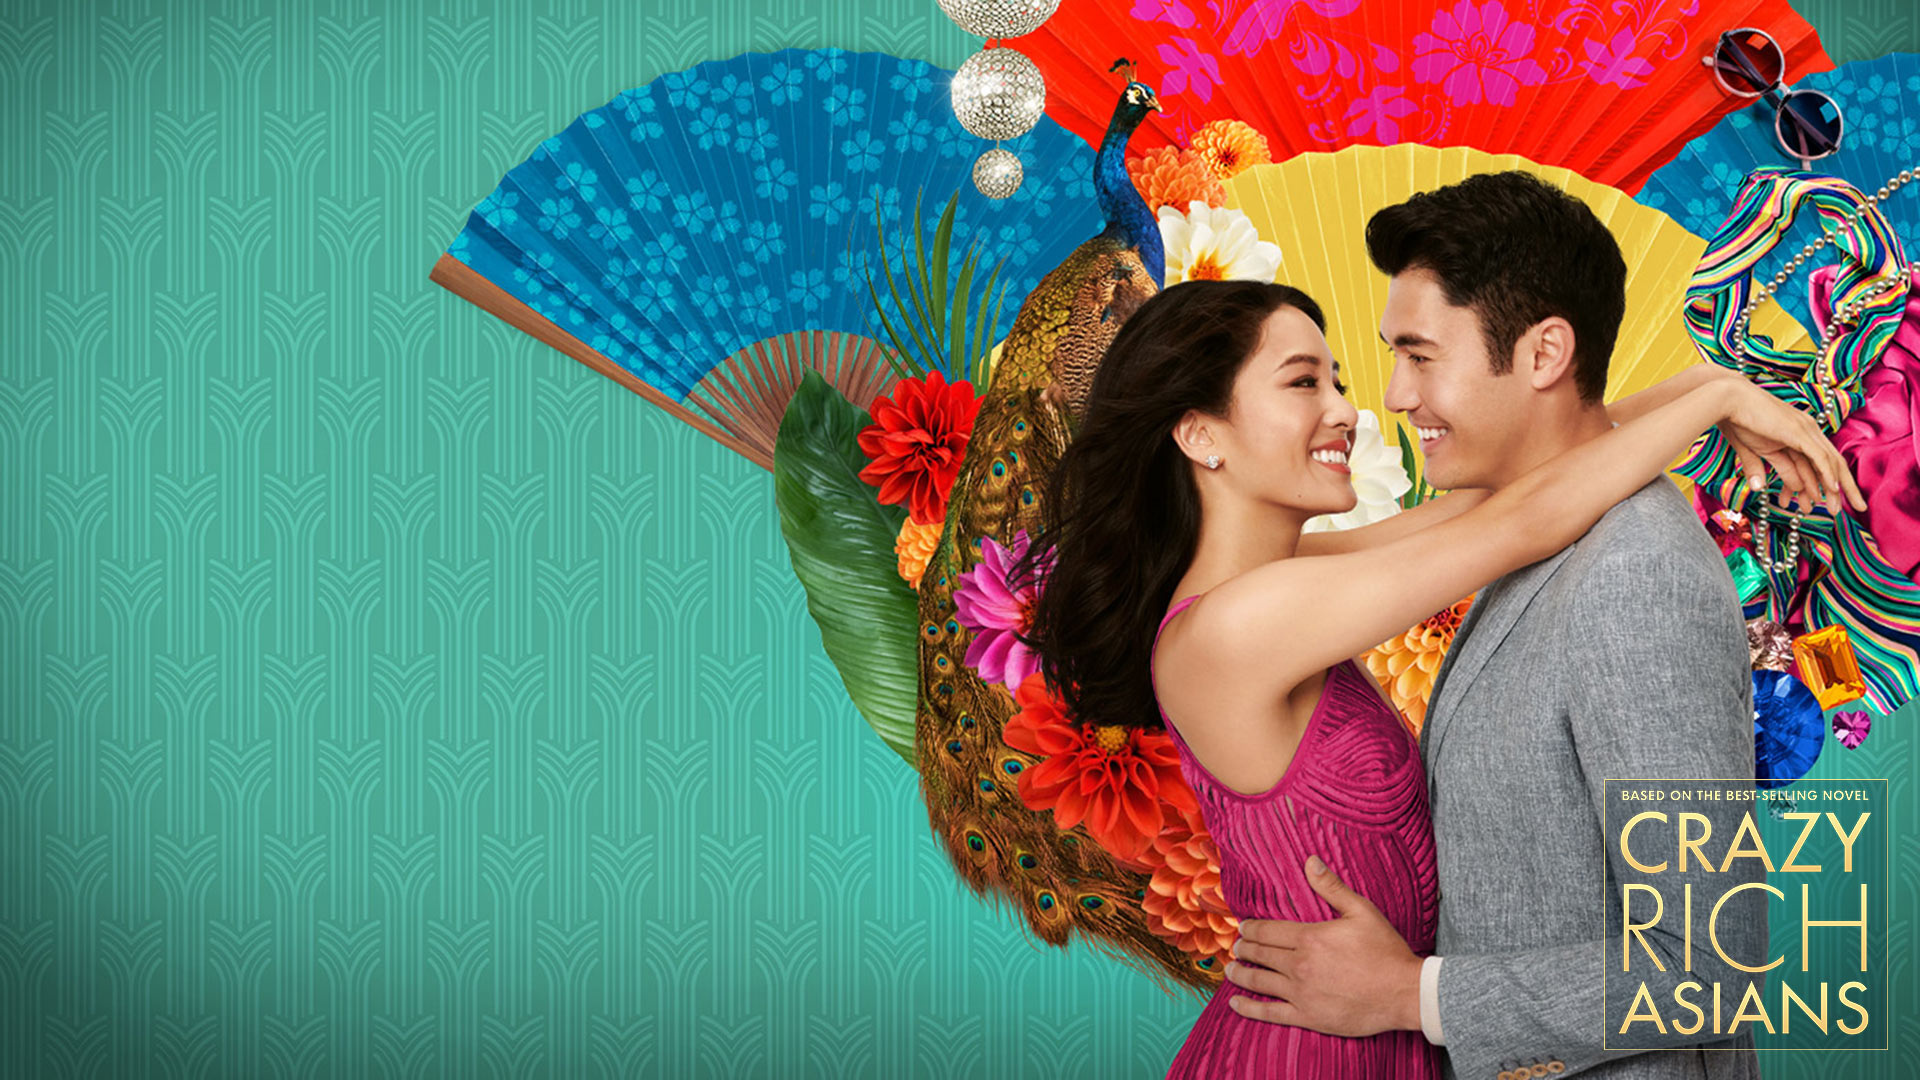 Crazy Rich Asians films, Posted by Christopher Mercado, 1920x1080 Full HD Desktop